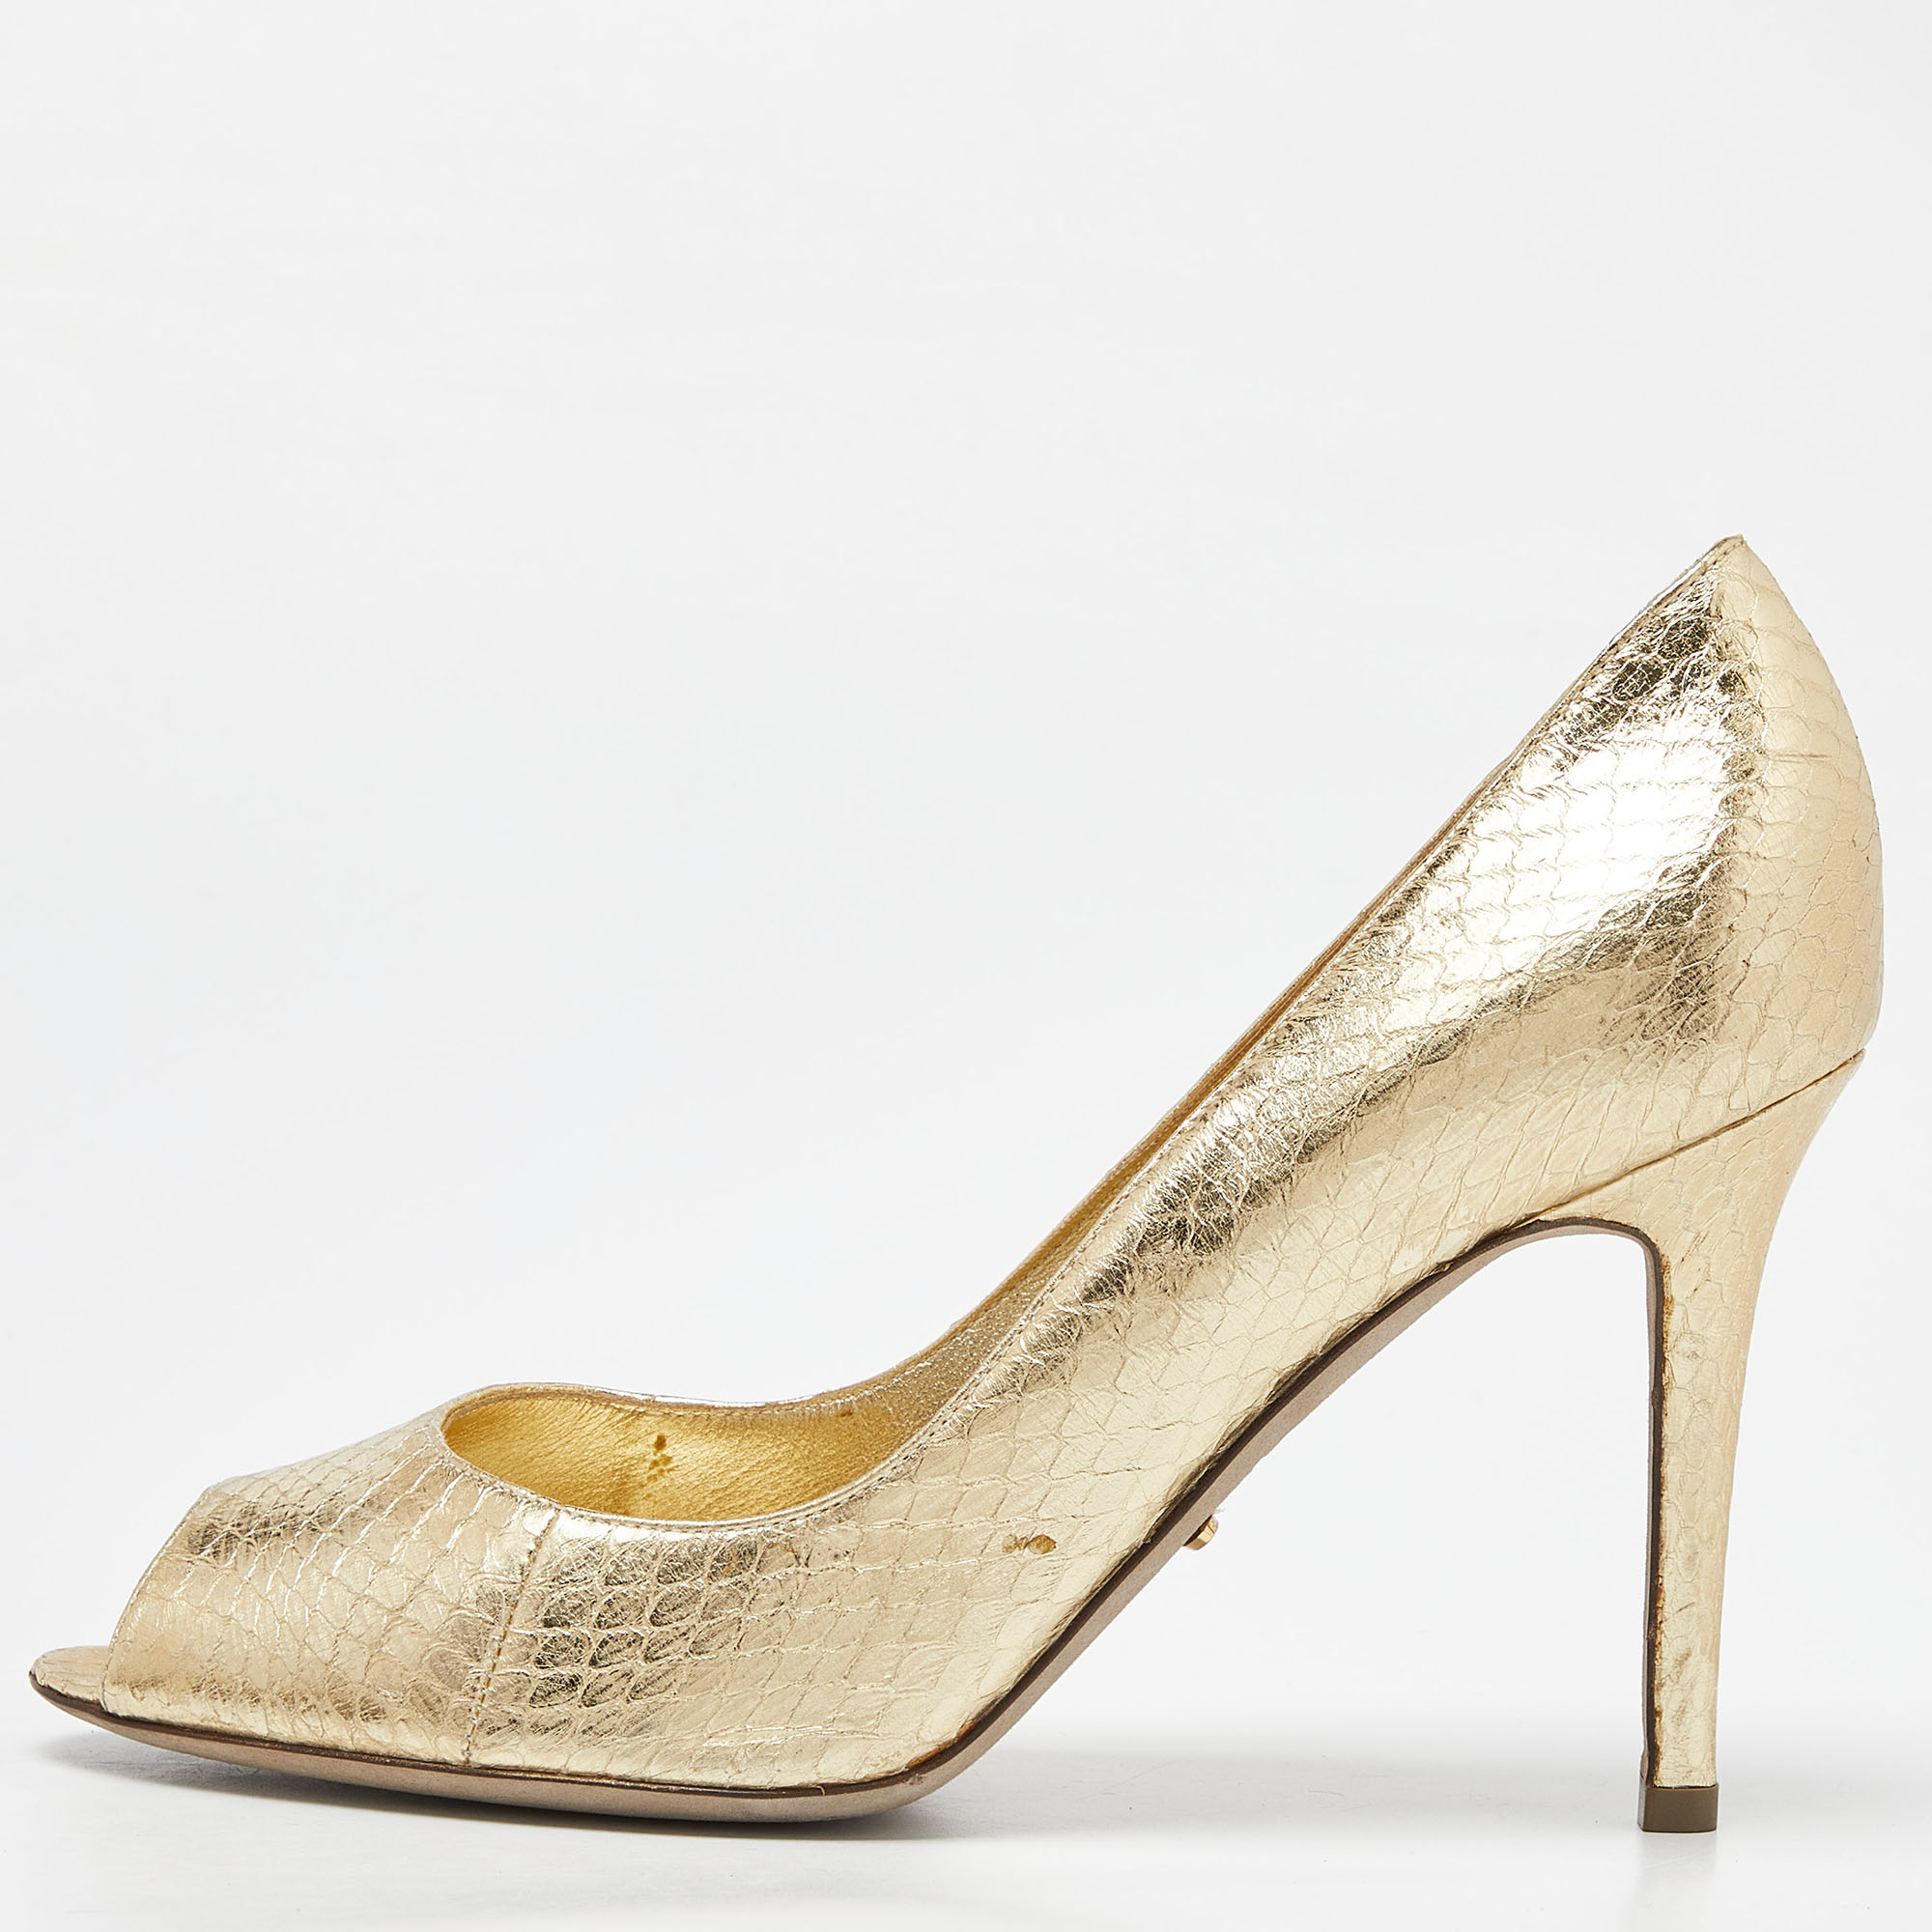 Sergio rossi gold watersnake leather peep toe pumps size 39